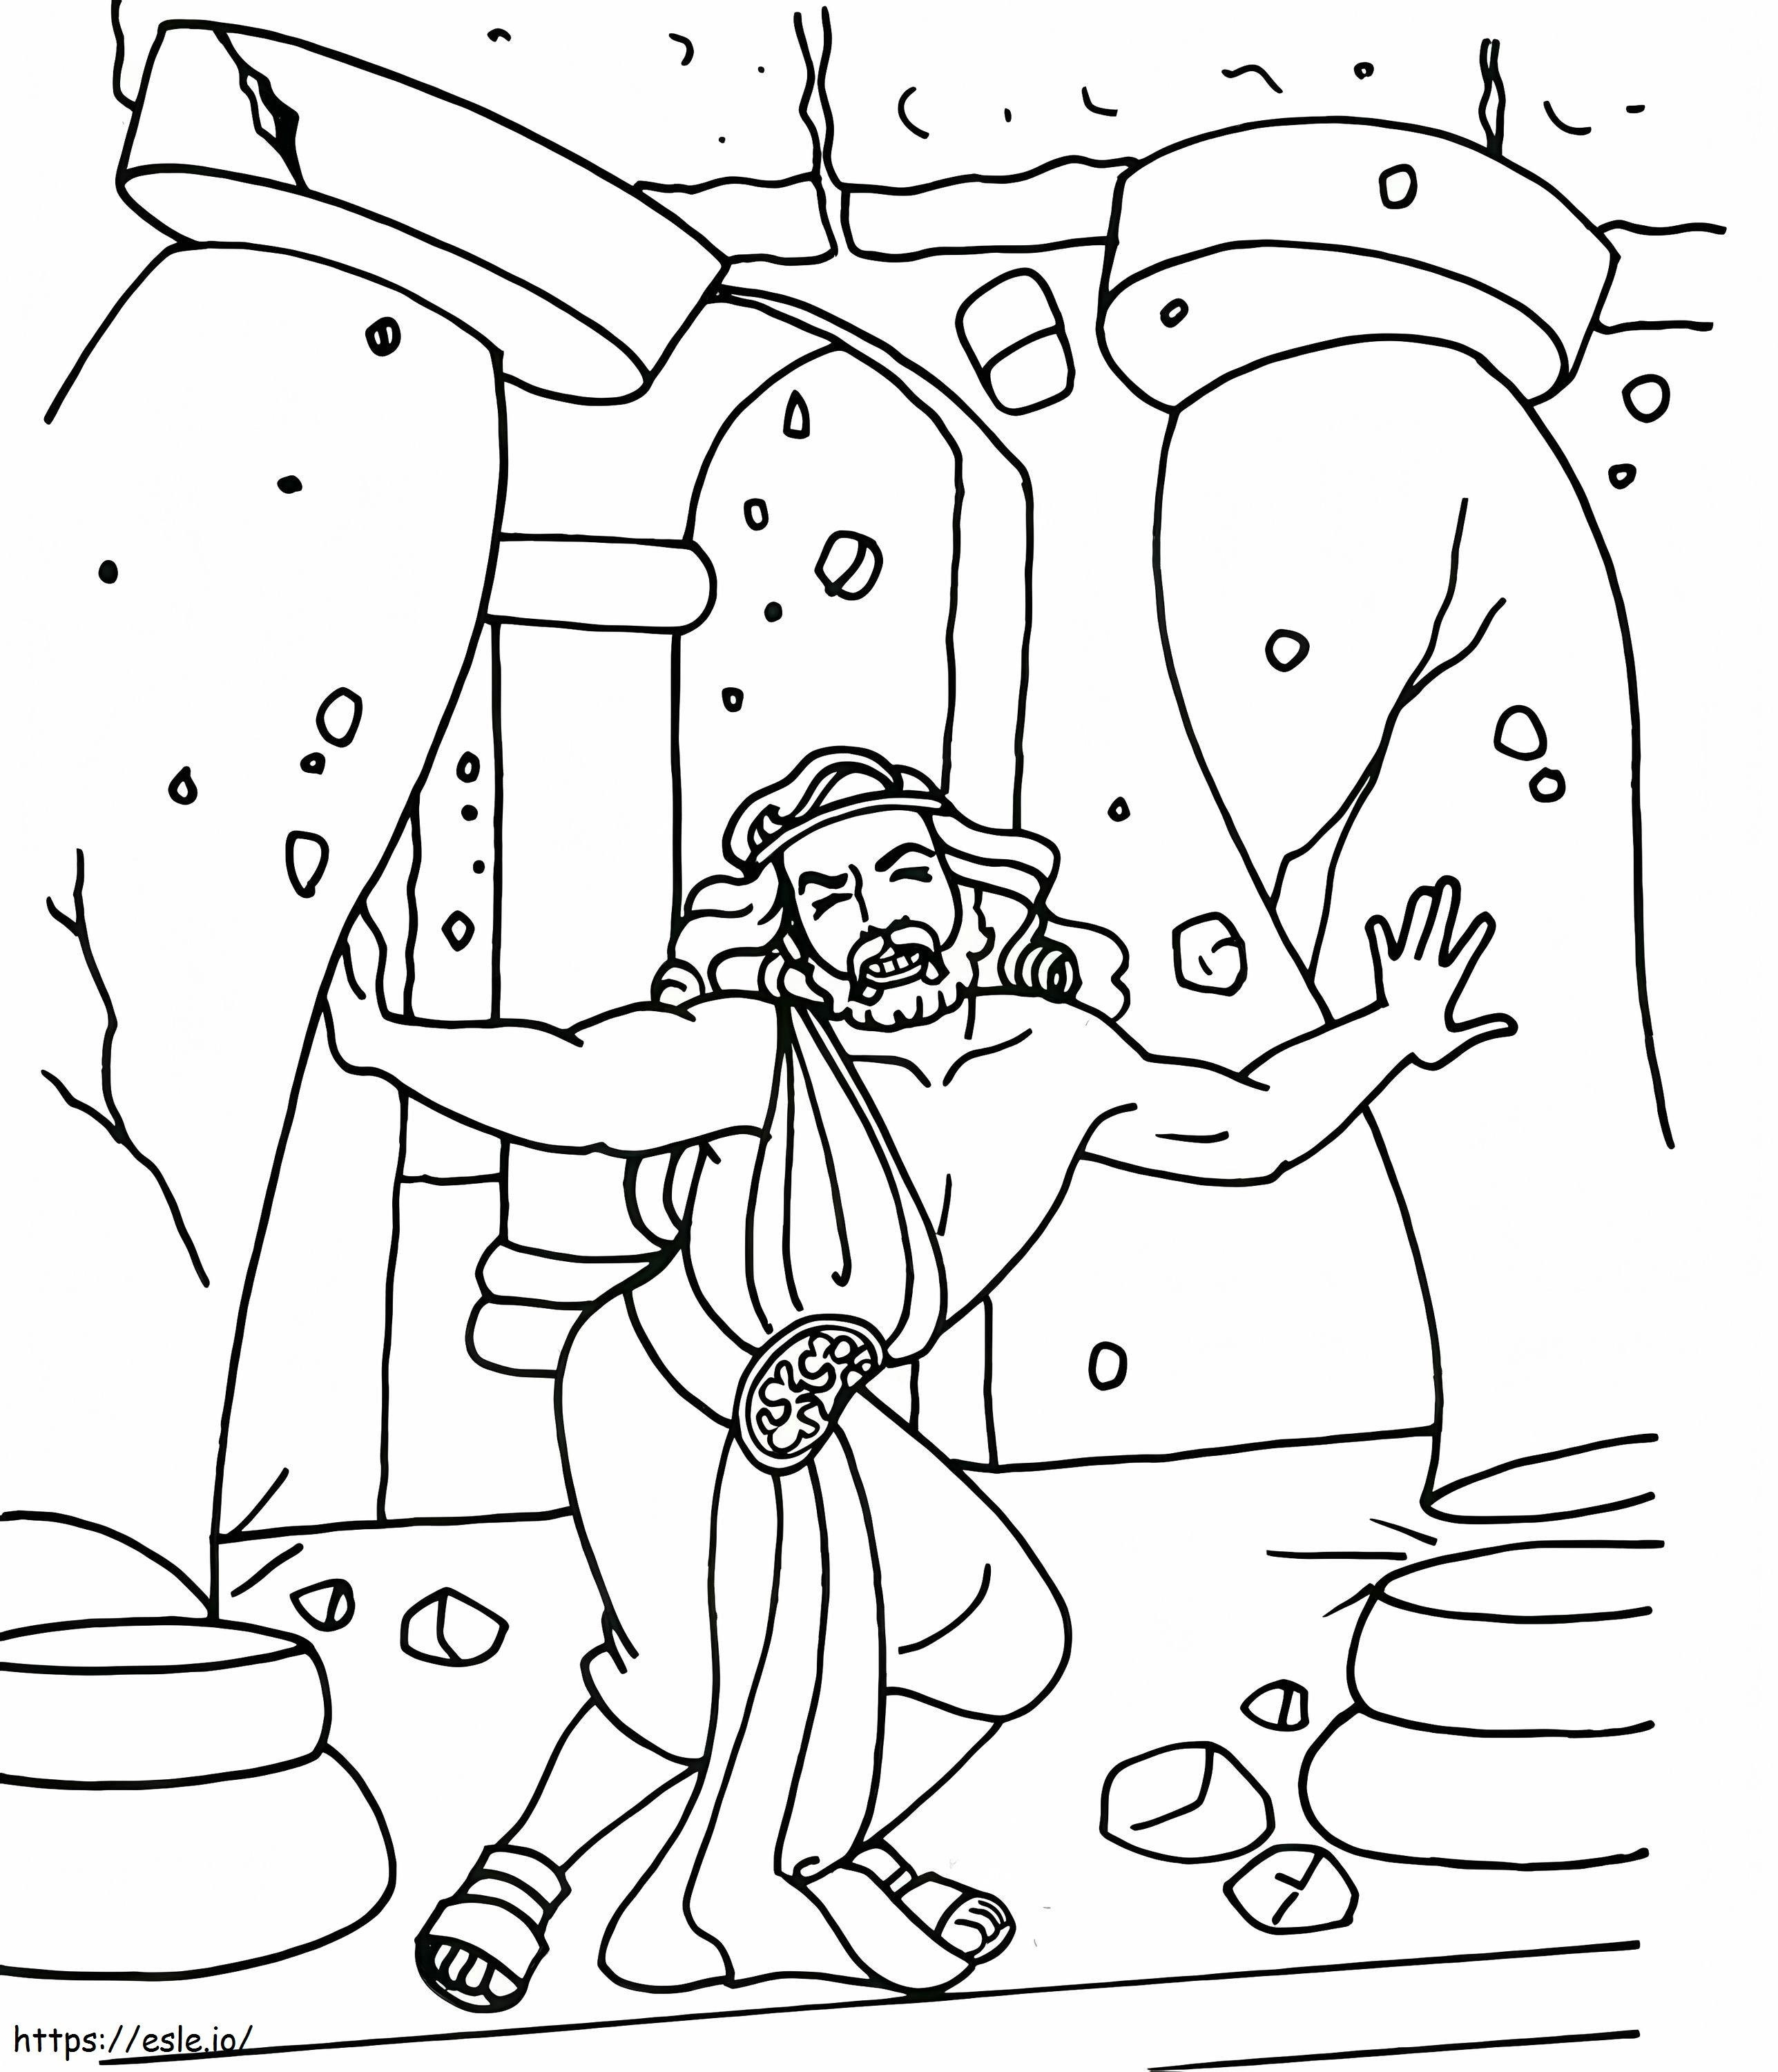 Sampson Is Strong coloring page